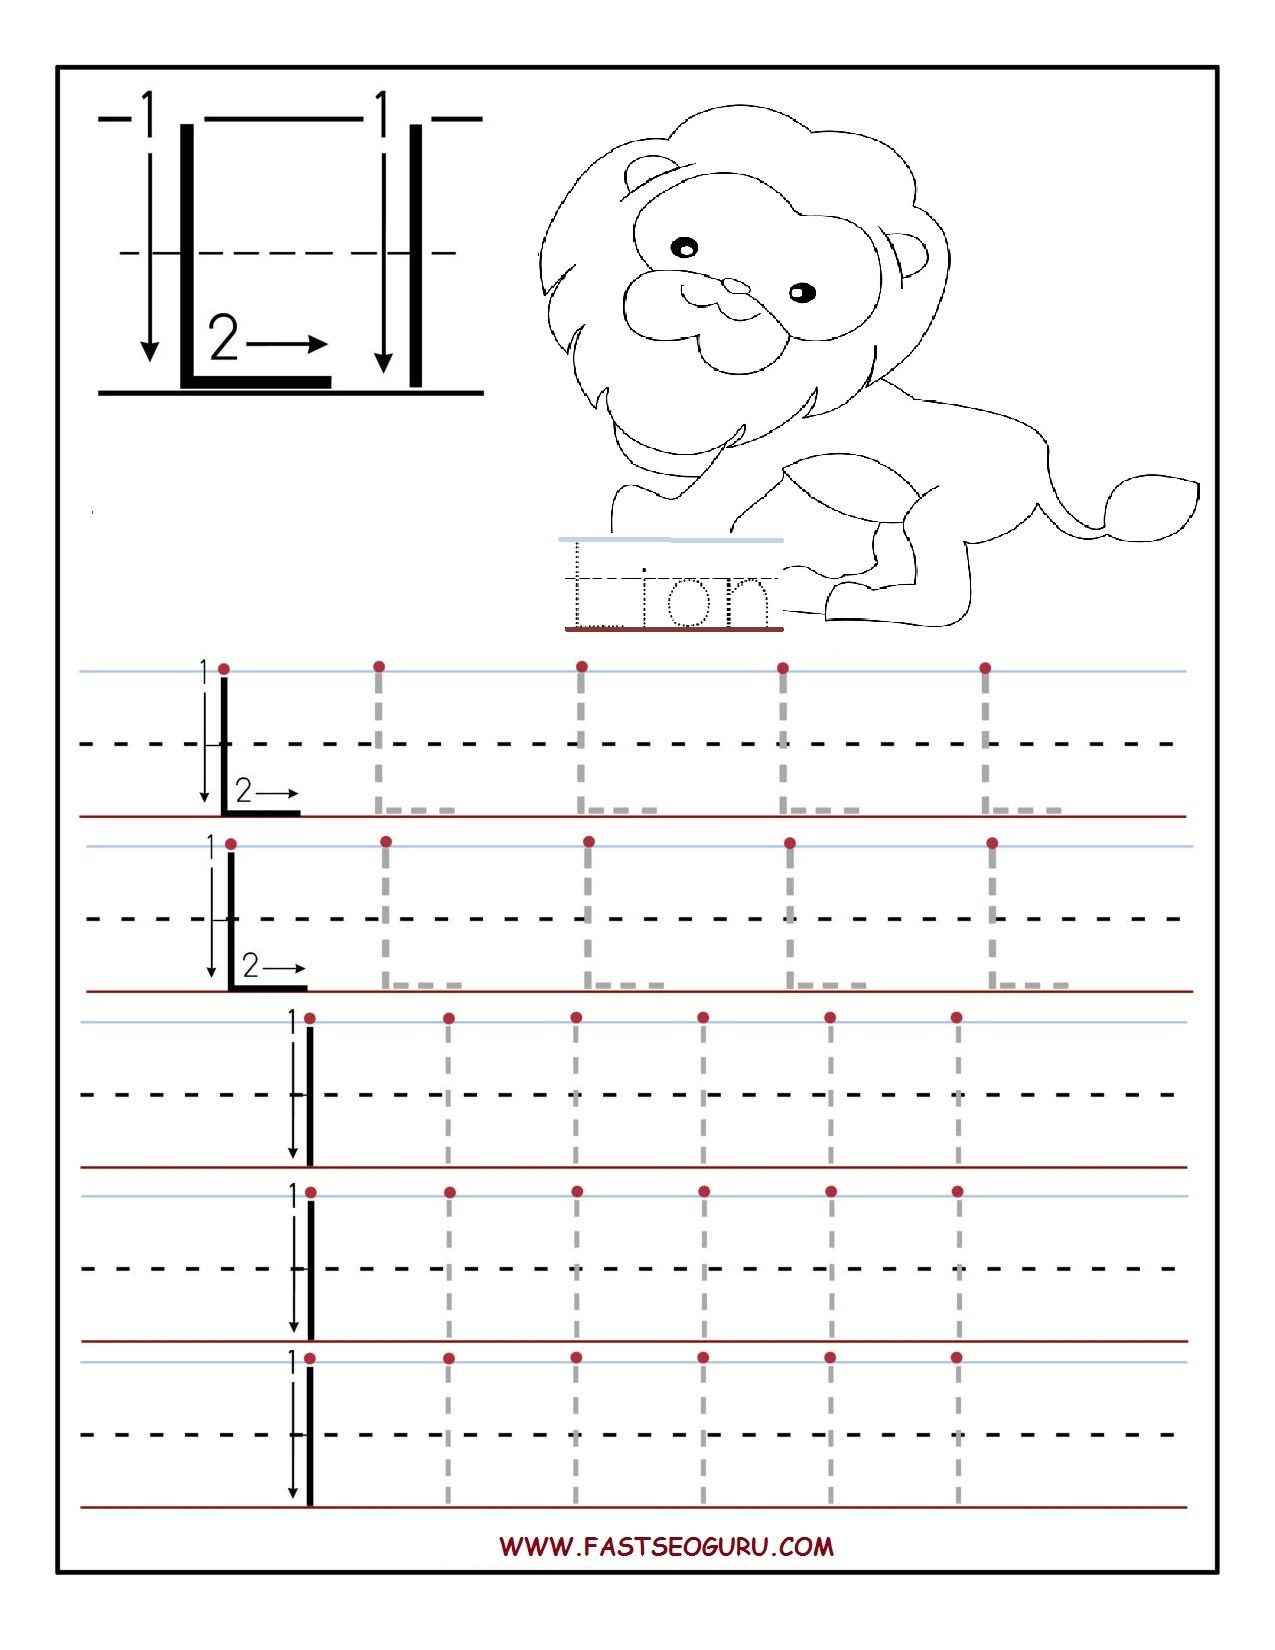 Printable Letter L Tracing Worksheets For Preschool pertaining to Large Alphabet Letters For Tracing